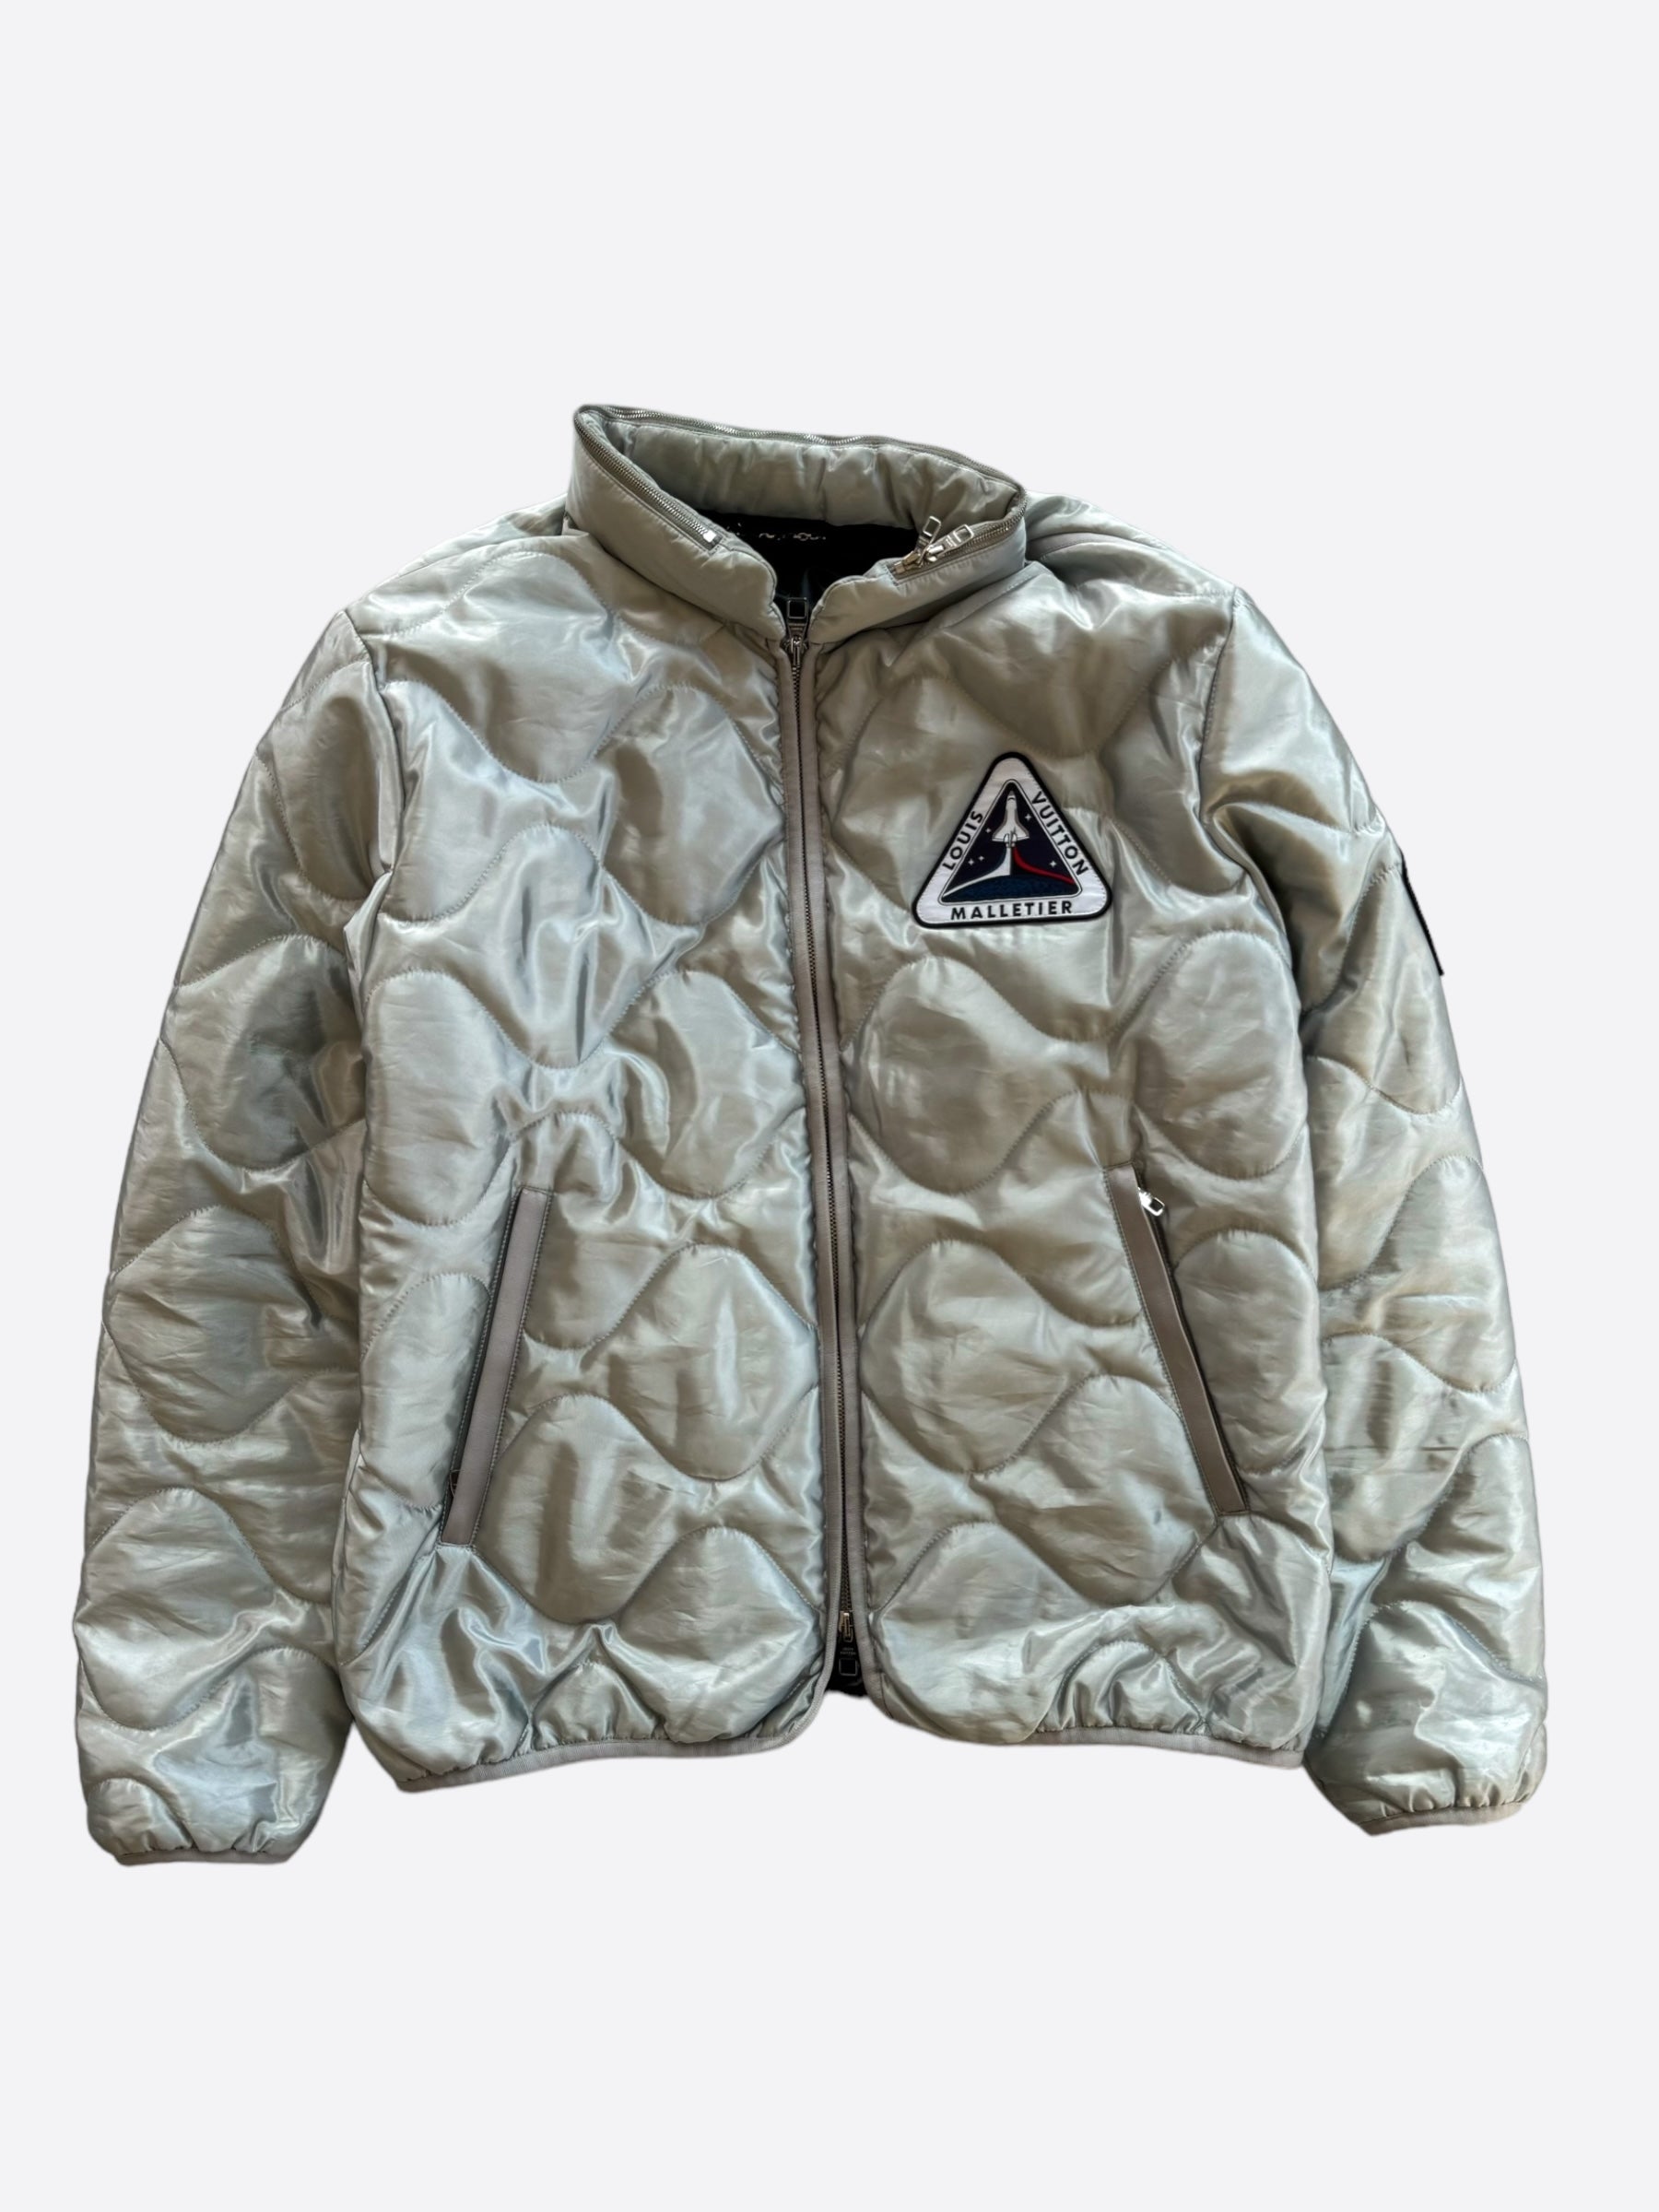 Louis Vuitton Silver Space Patch Bomber Jacket